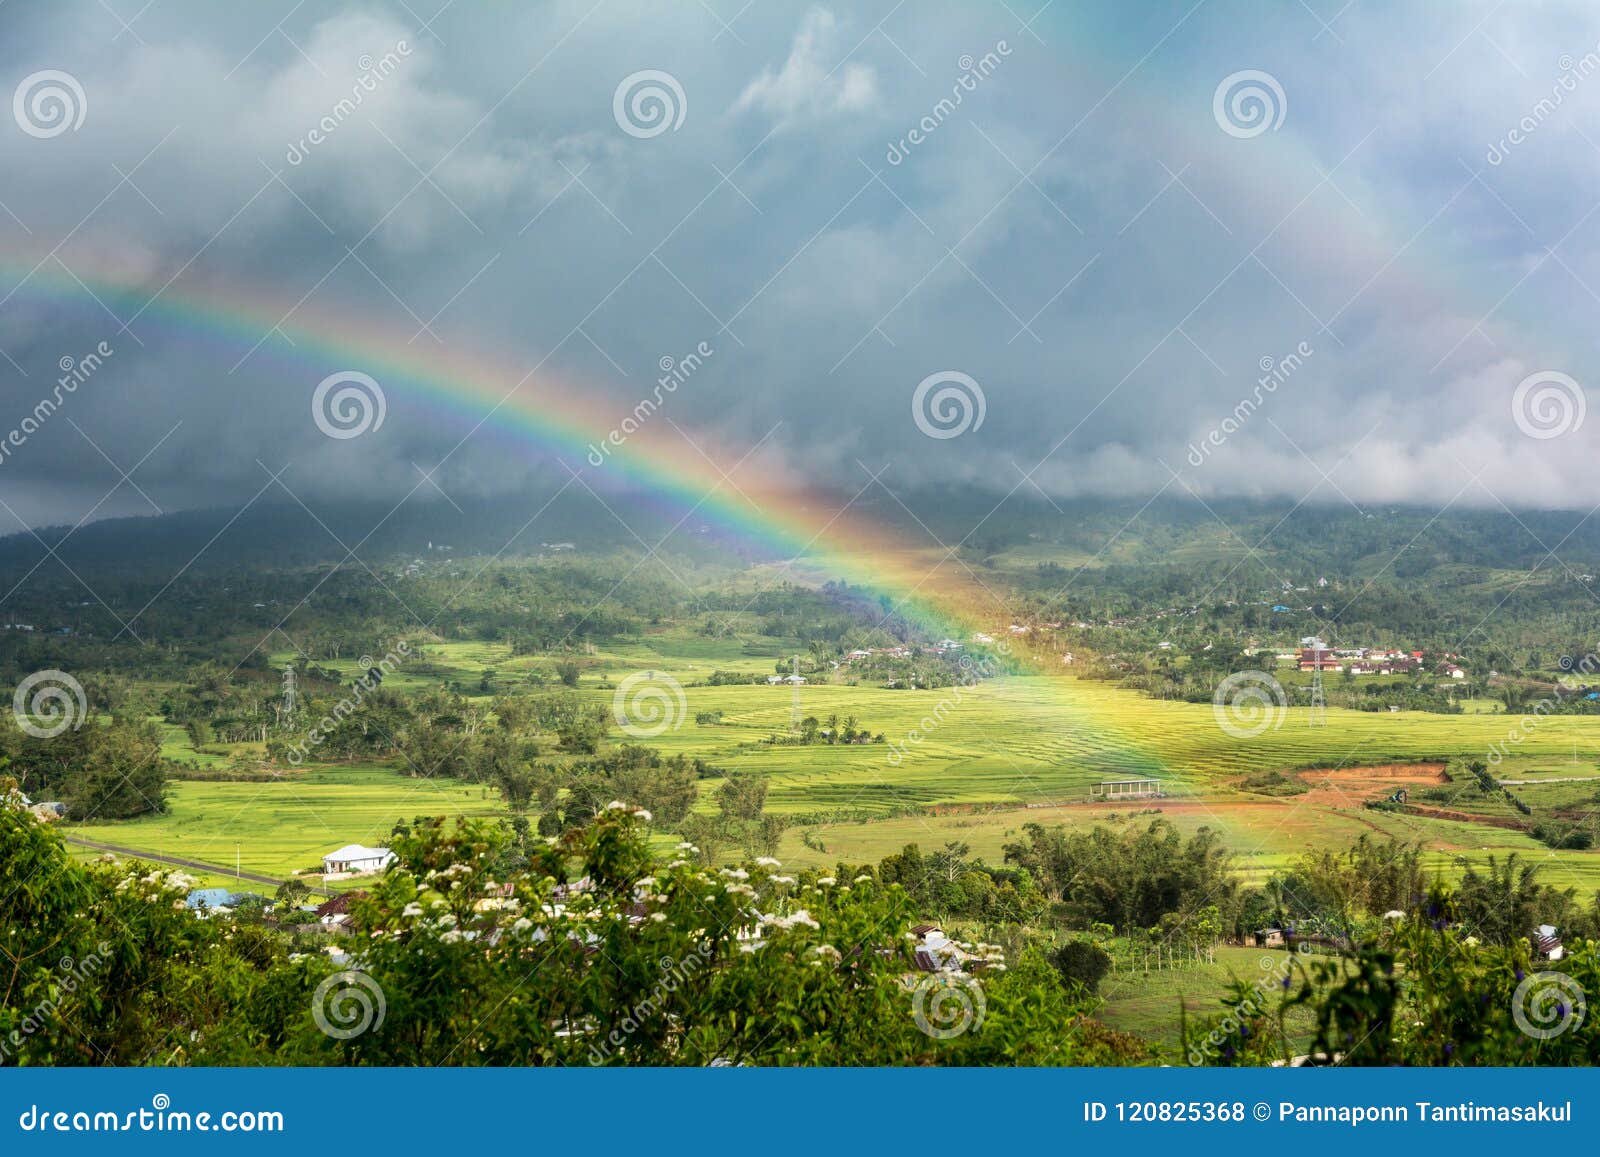 double rainbow over countryside with a storm background. ruteng, manggarai regency, flores, east nusa tenggara, indonesia